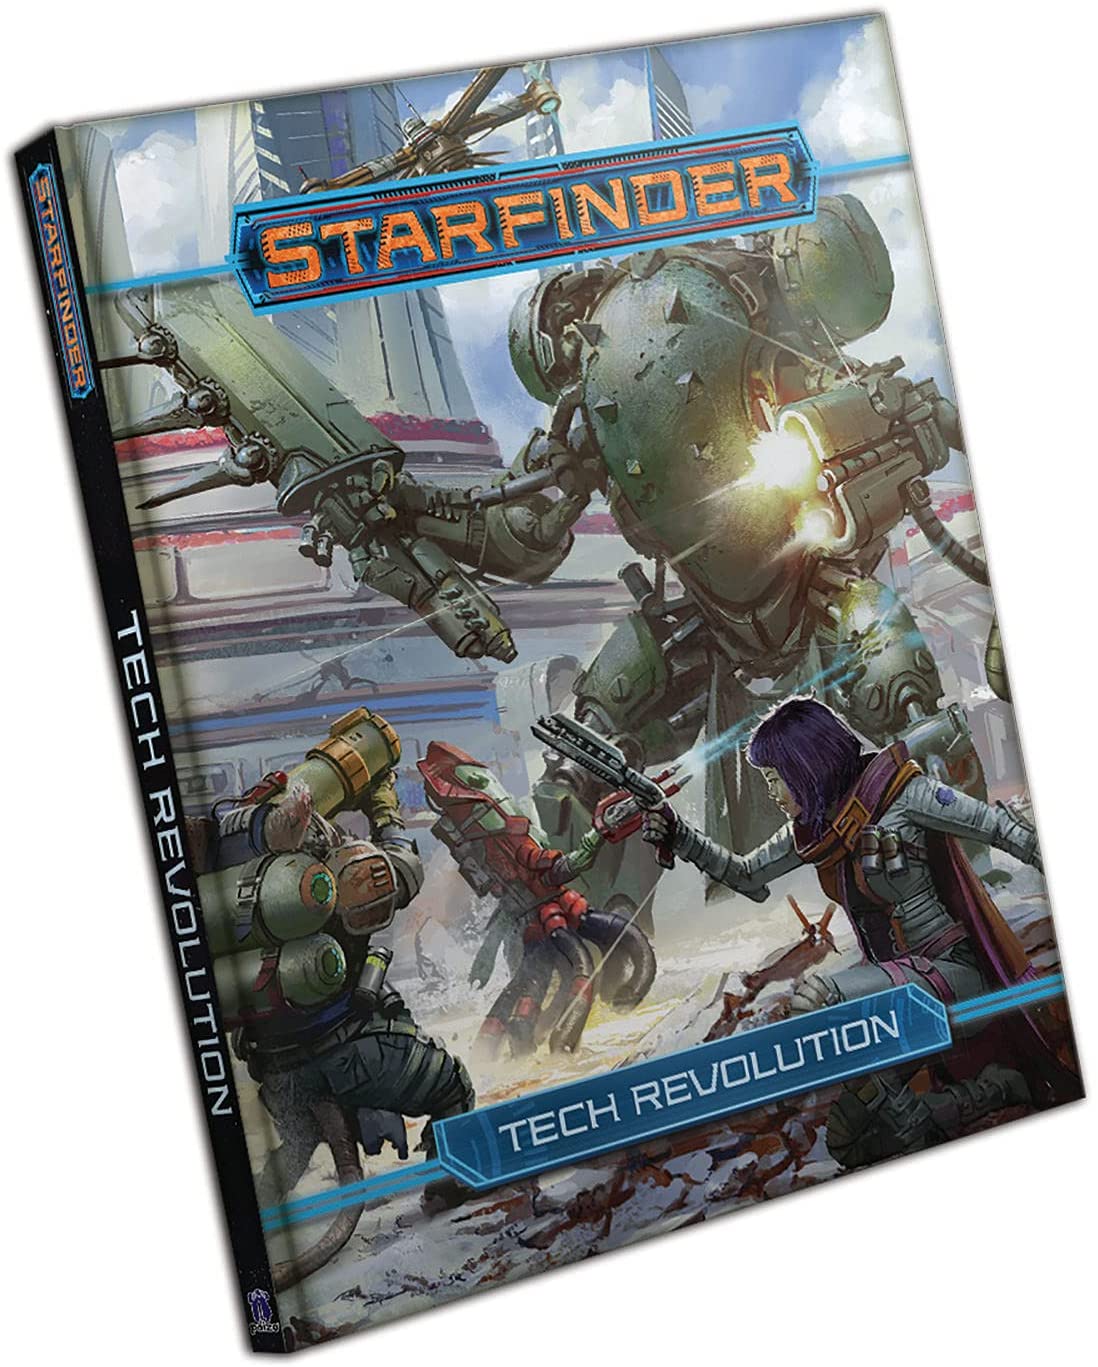 Starfinder: Galaxy Exploration Guide and Tech Revolution – Black Gate